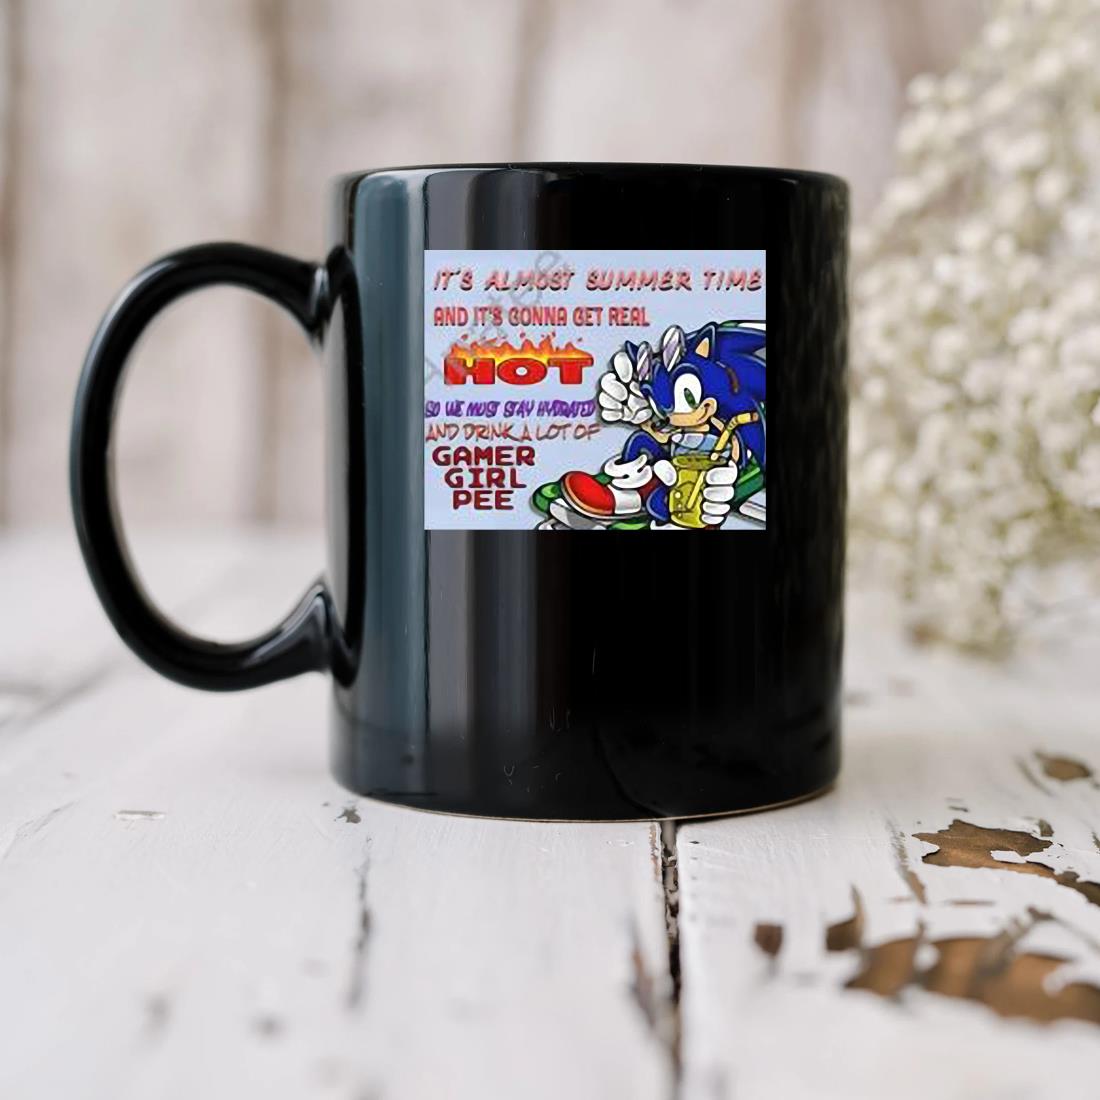 Sonic It's Almost Summer Time And It's Gonna Get Real Hot So We Must Stay Hydrated And Drink A Lot Of Gamer Girl Pee Mug